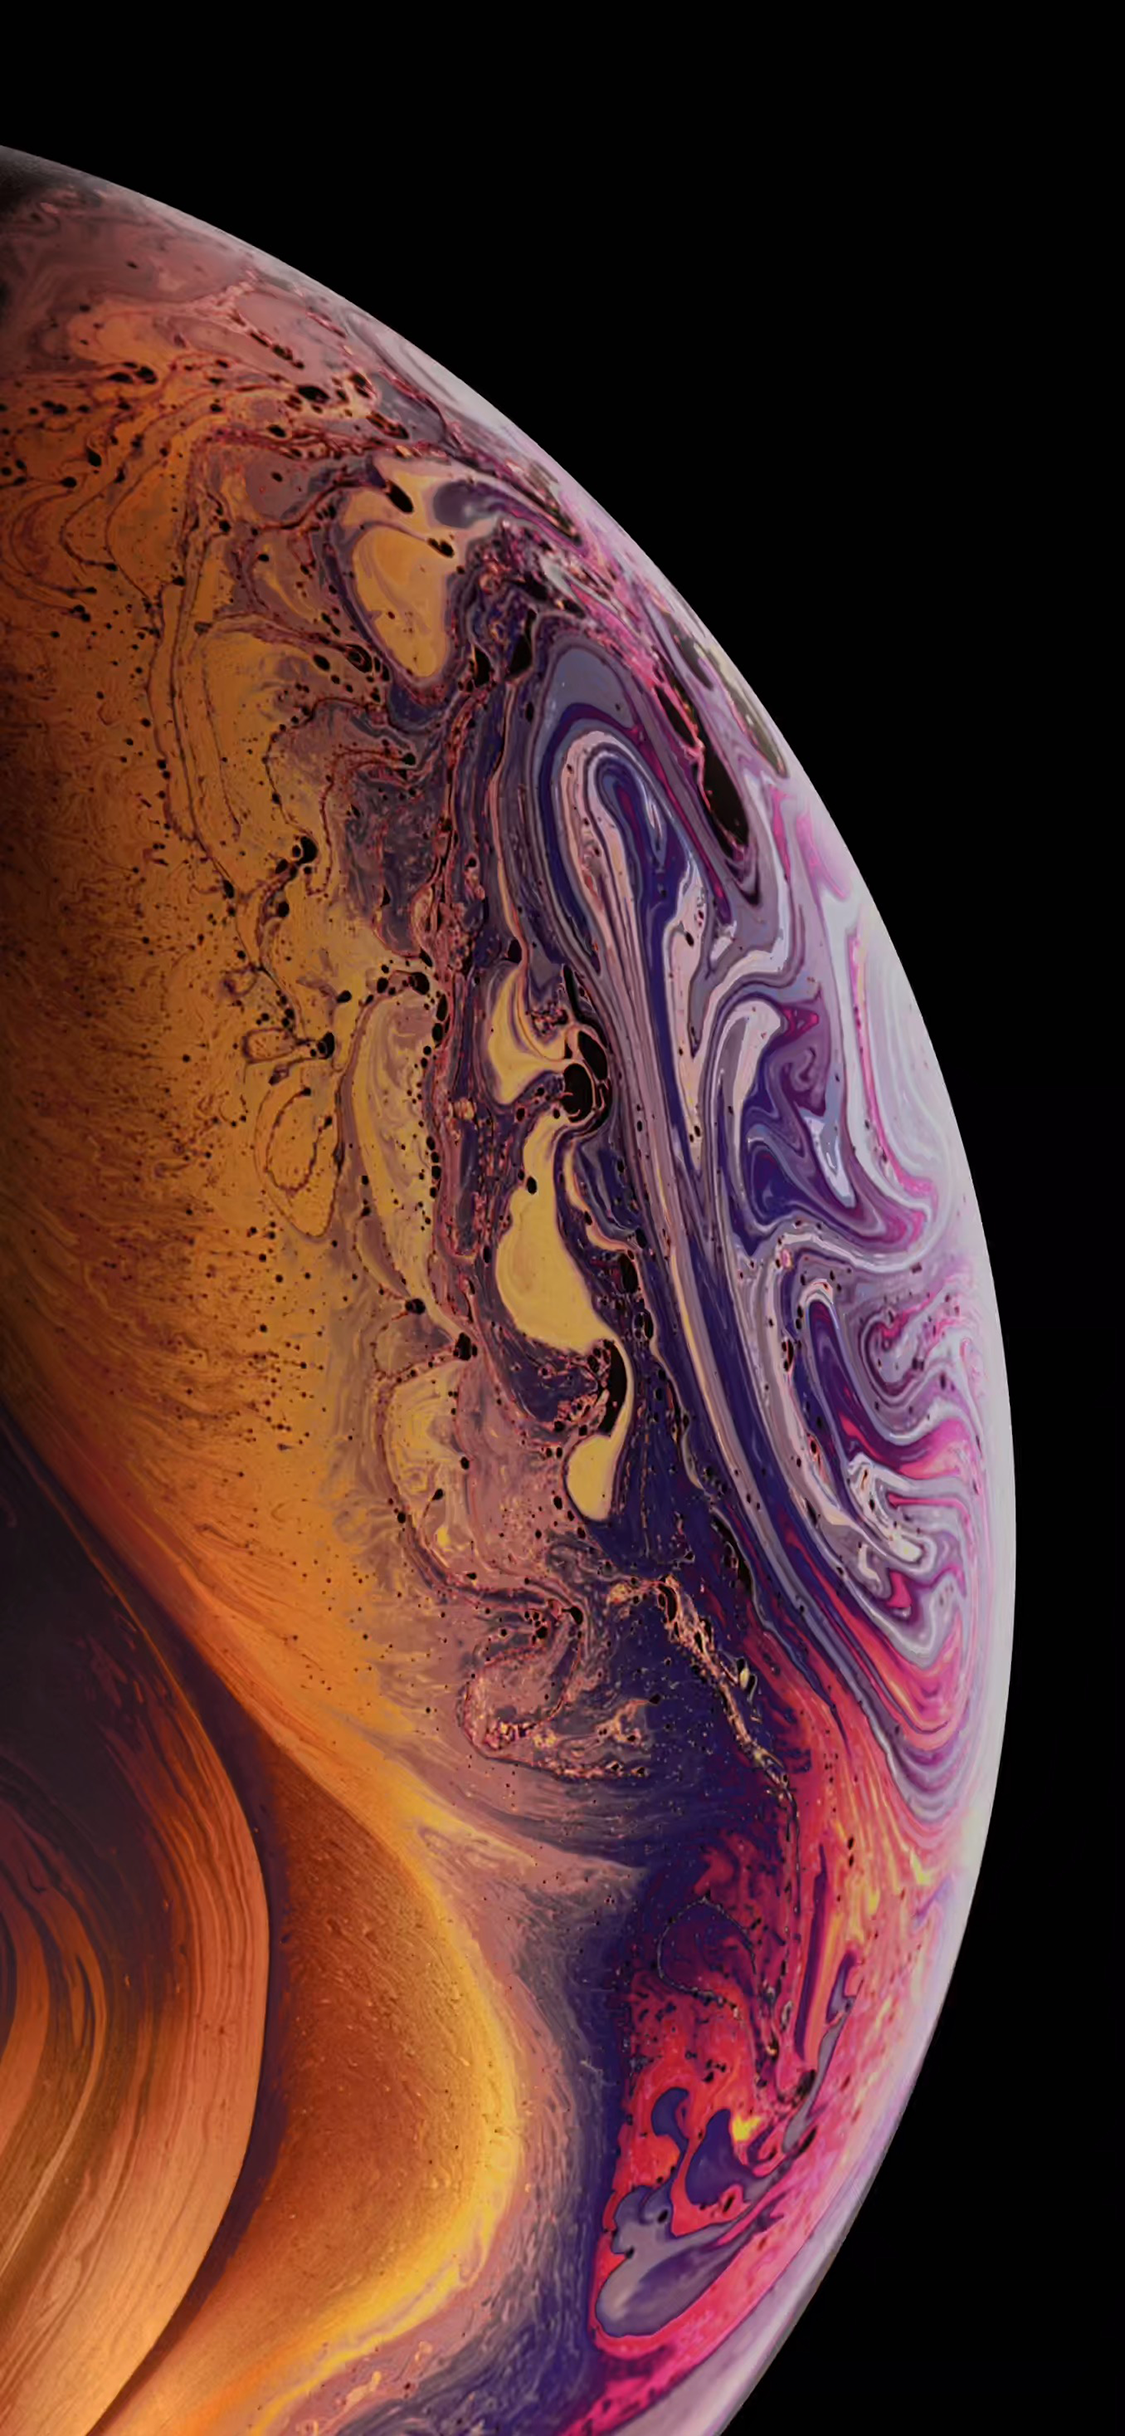 Wallpapers Iphone Xr Wallpapers